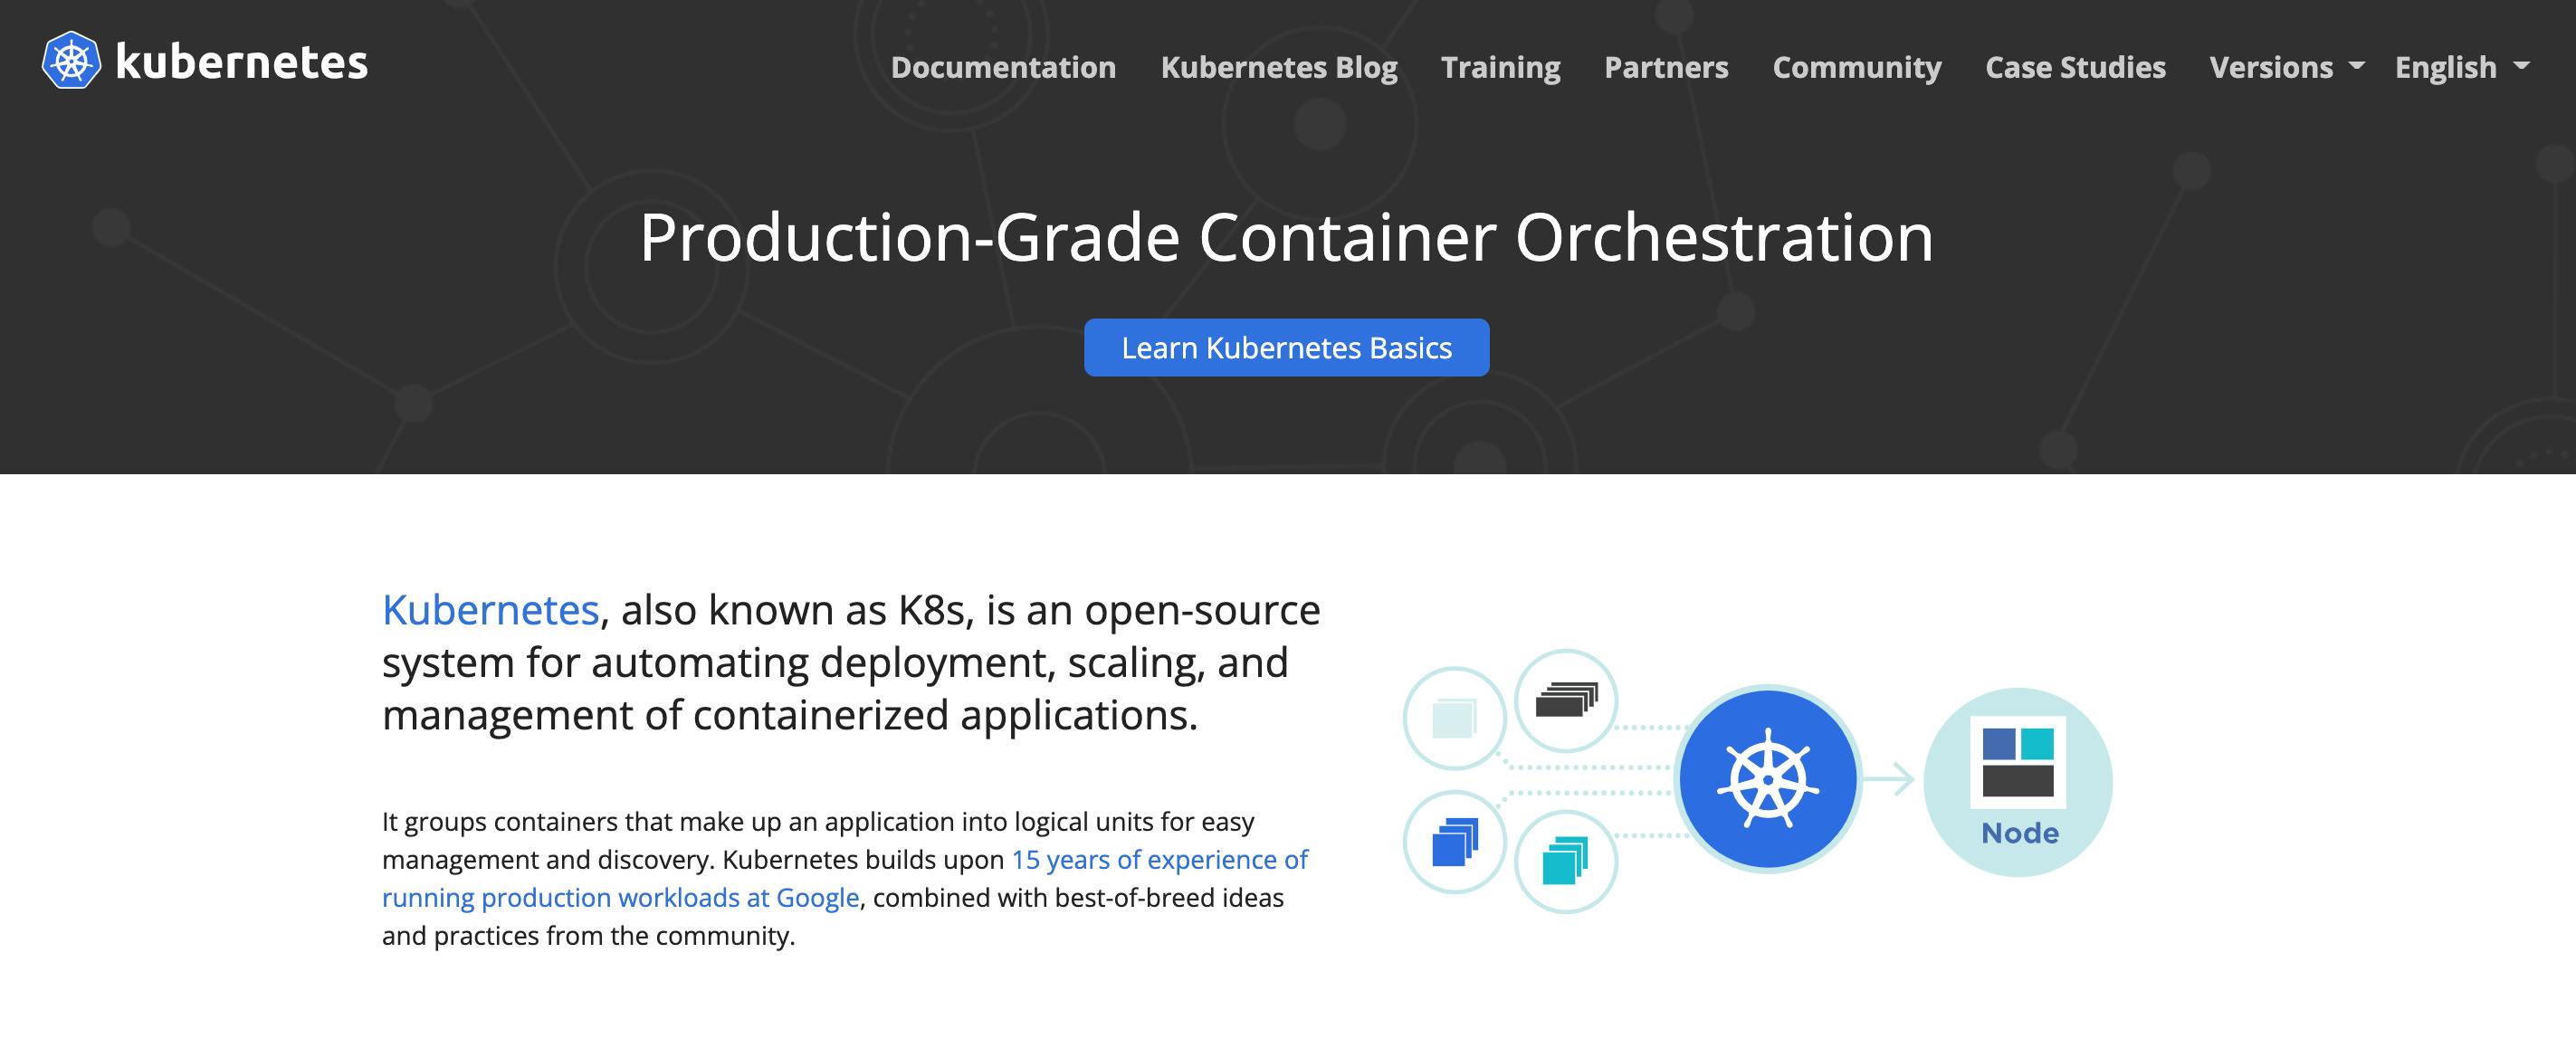 Screenshot from Kubernetes website - "Production-Grade Container Orchestration"